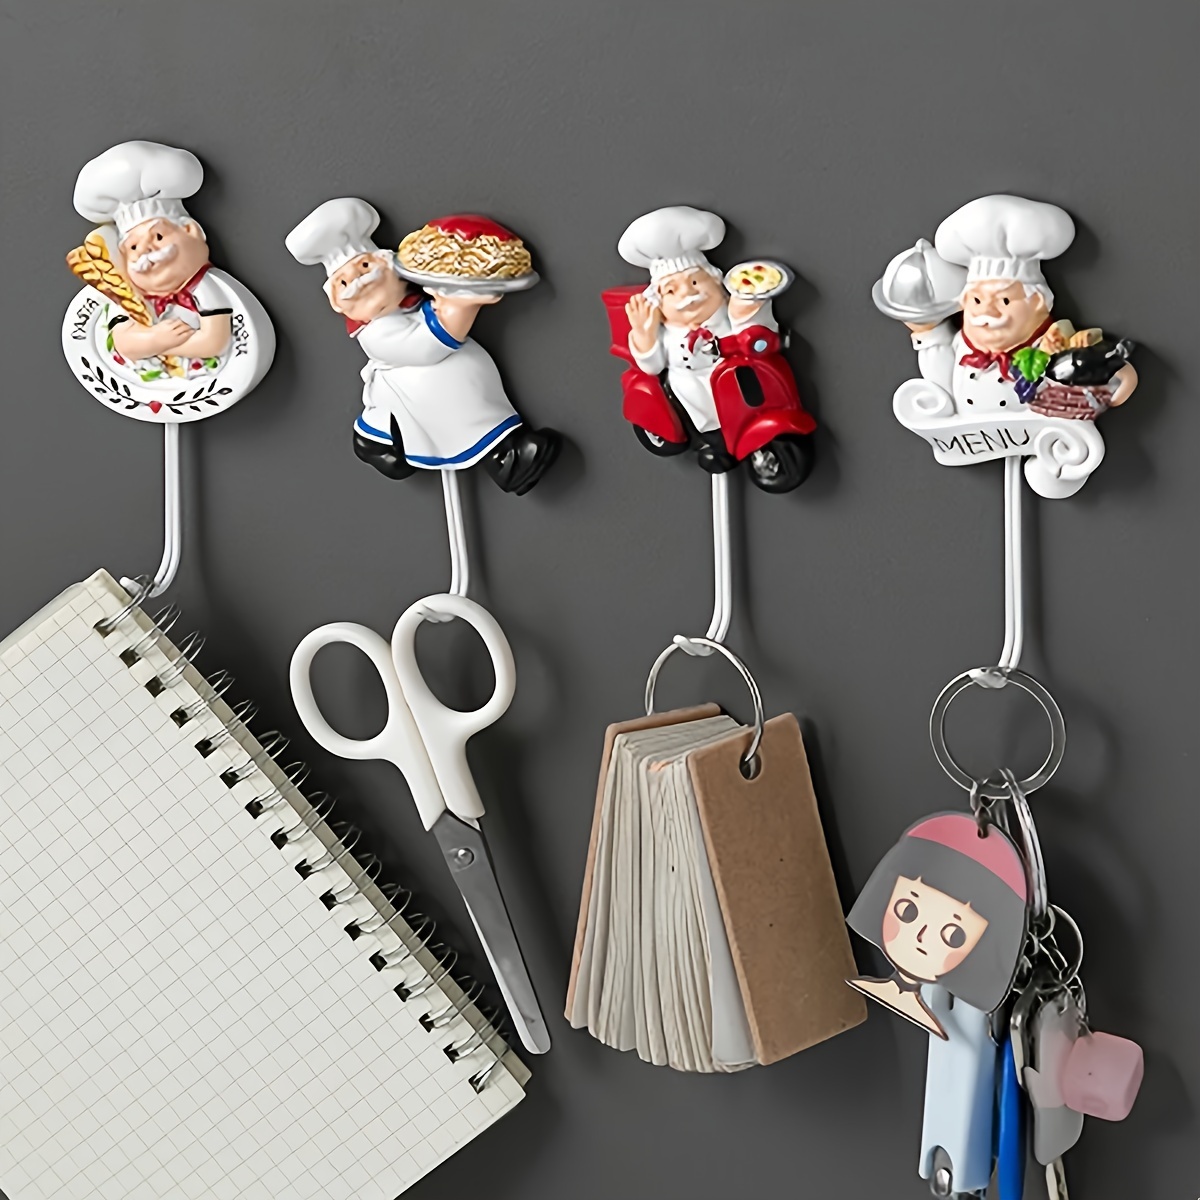 

4pcs French Chef Figurine Wall Decoration Hooks Fat Chef Kitchen Decor Resin Wall Hooks Resin Adhesive Hooks Cook Wall Mount Rack Hook Hanger For Home, Kitchen, Garden, Garage Organizing